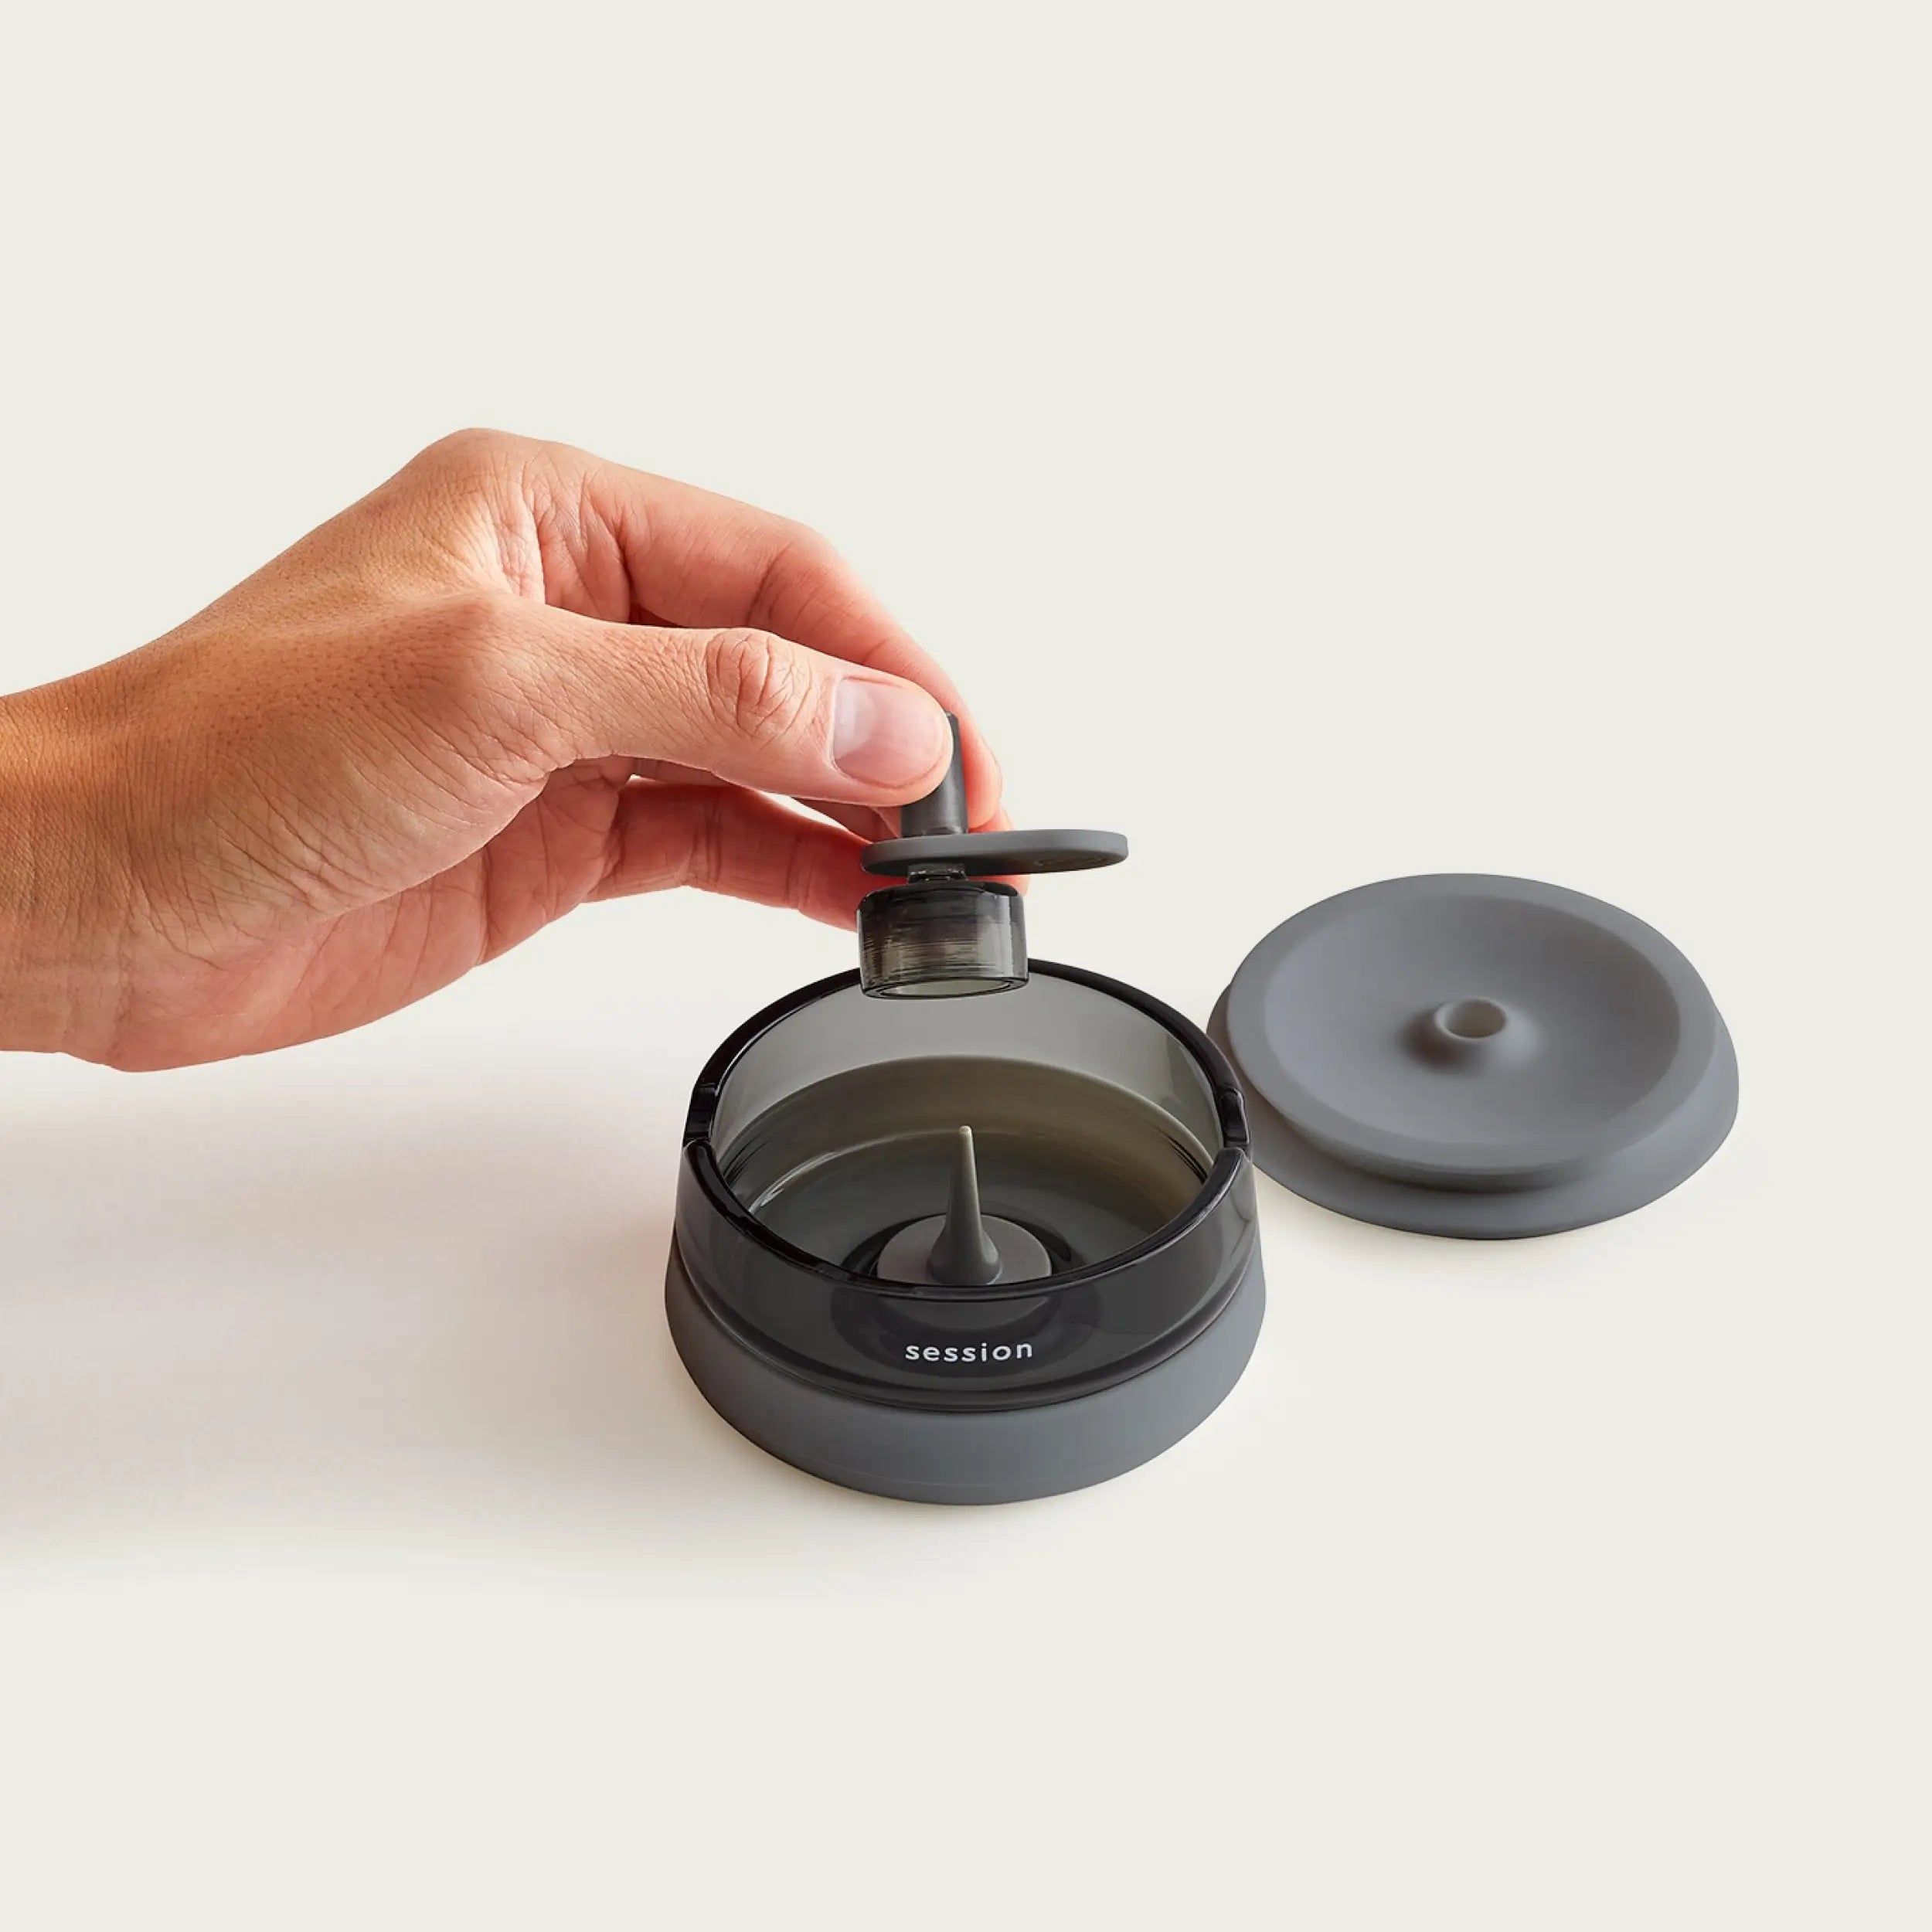 Session Goods Home Ashtray with Removable Debowler: The Ultimate Smoking Companion